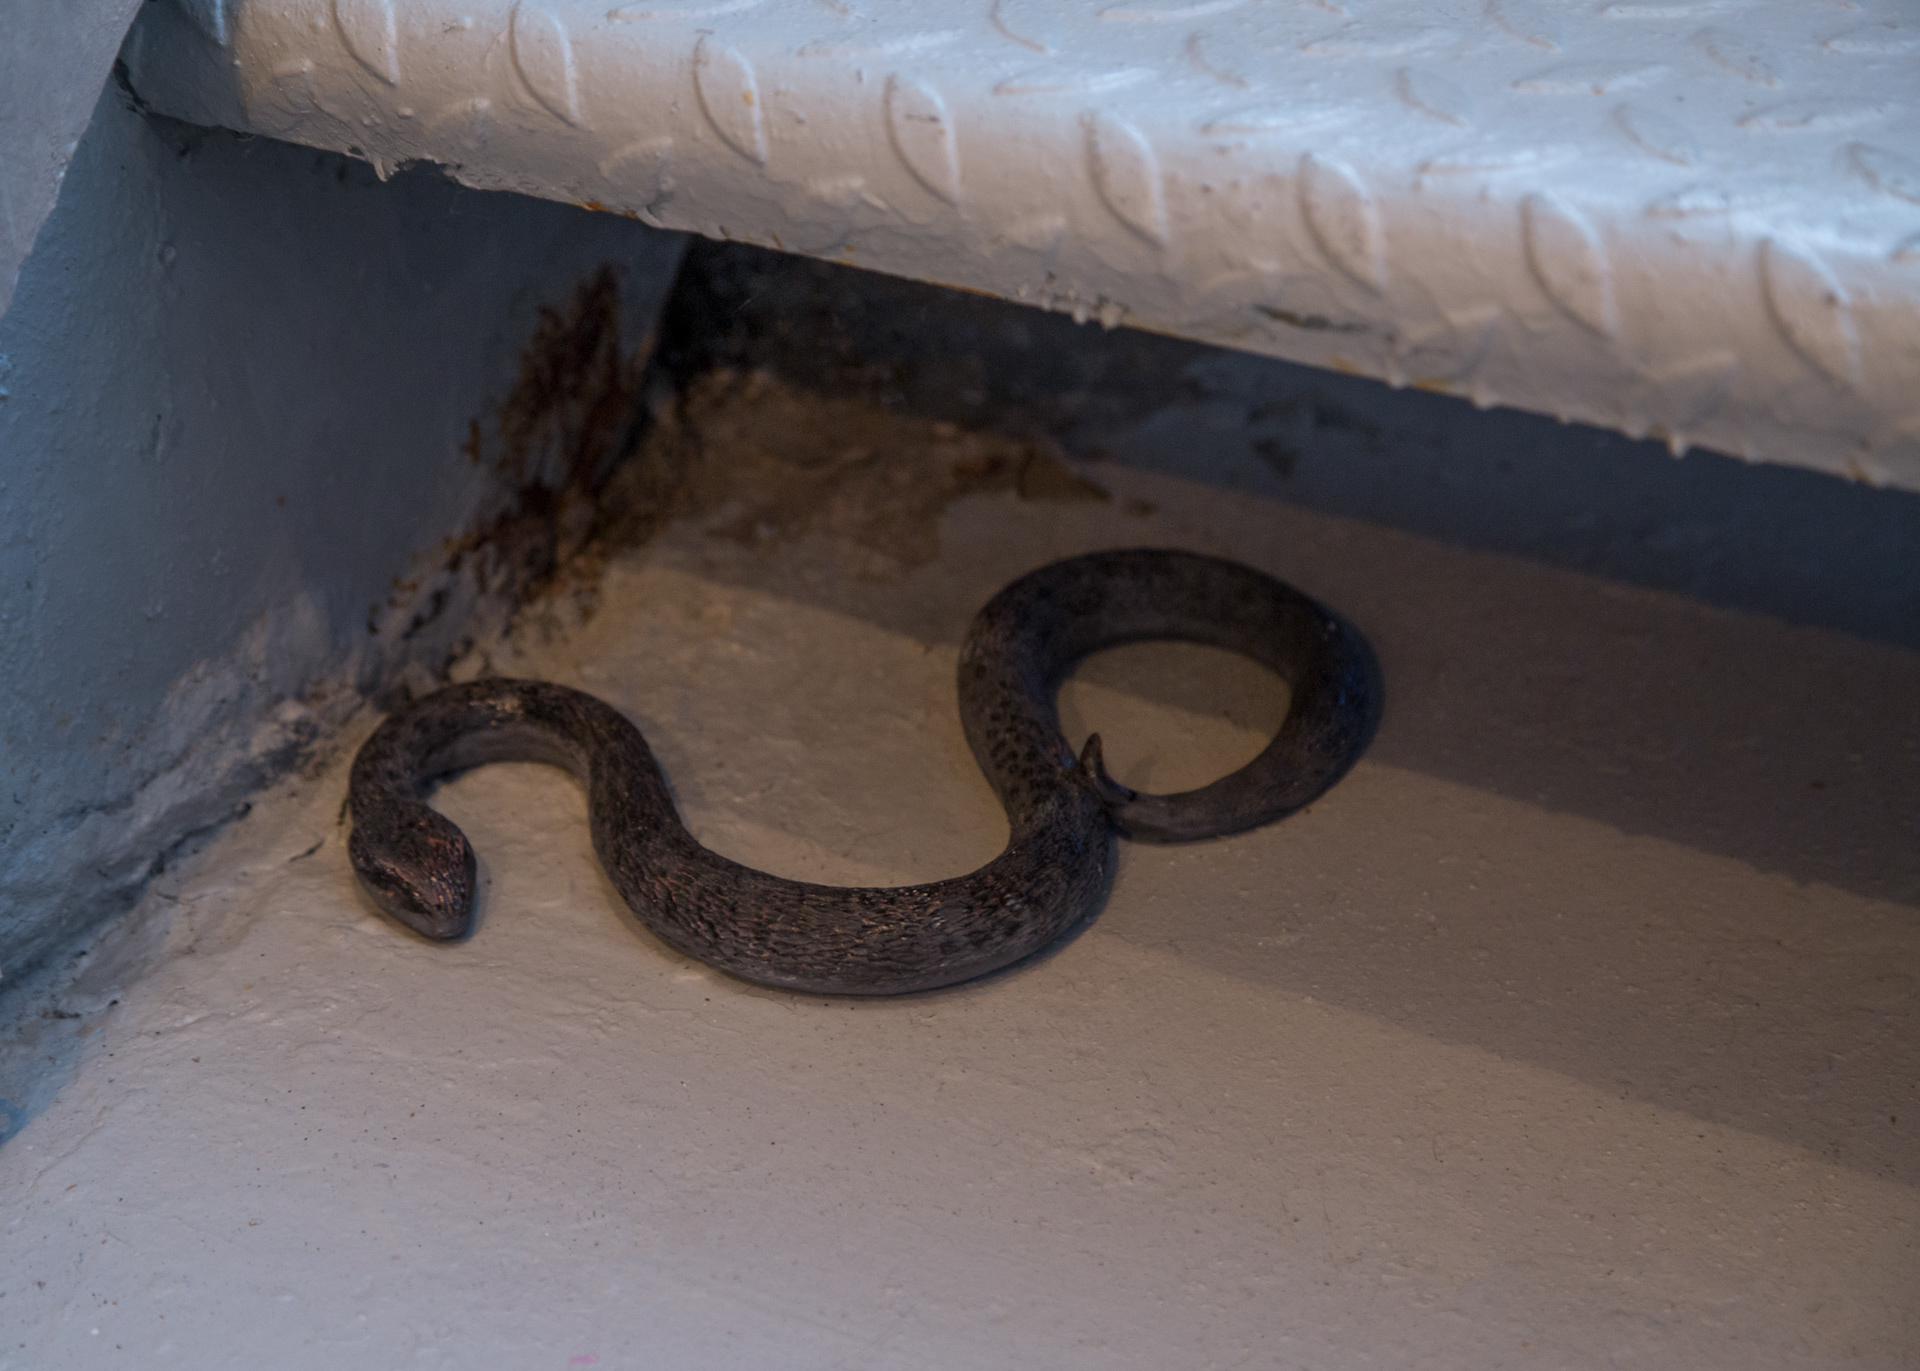  Detail of ceramic snake hiding under gallery entry stairs. 